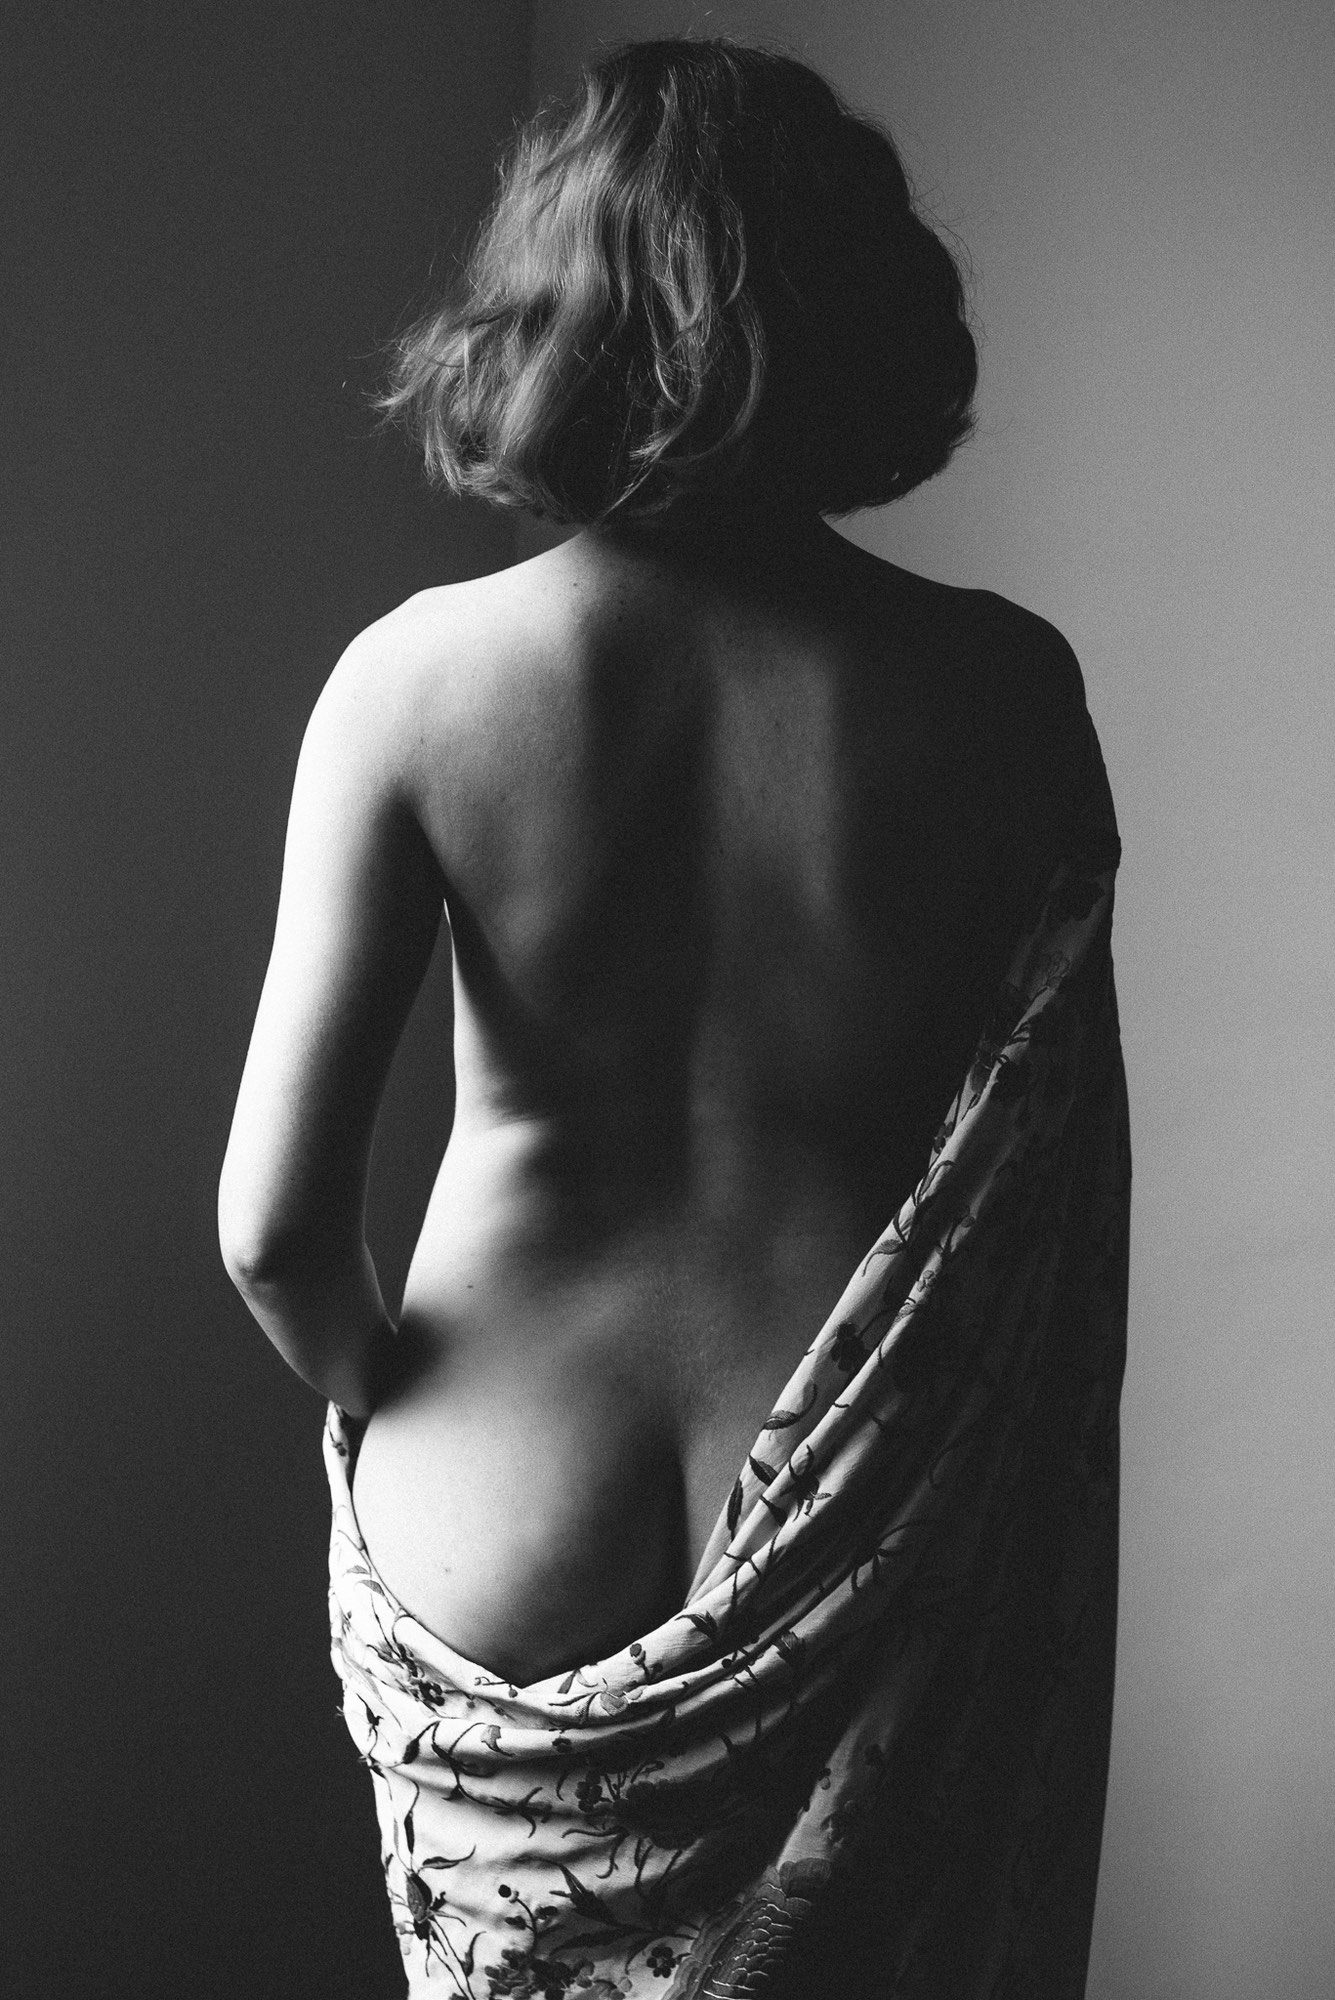 A black and white back view of a woman with a piano shawl obscuring her left buttock.